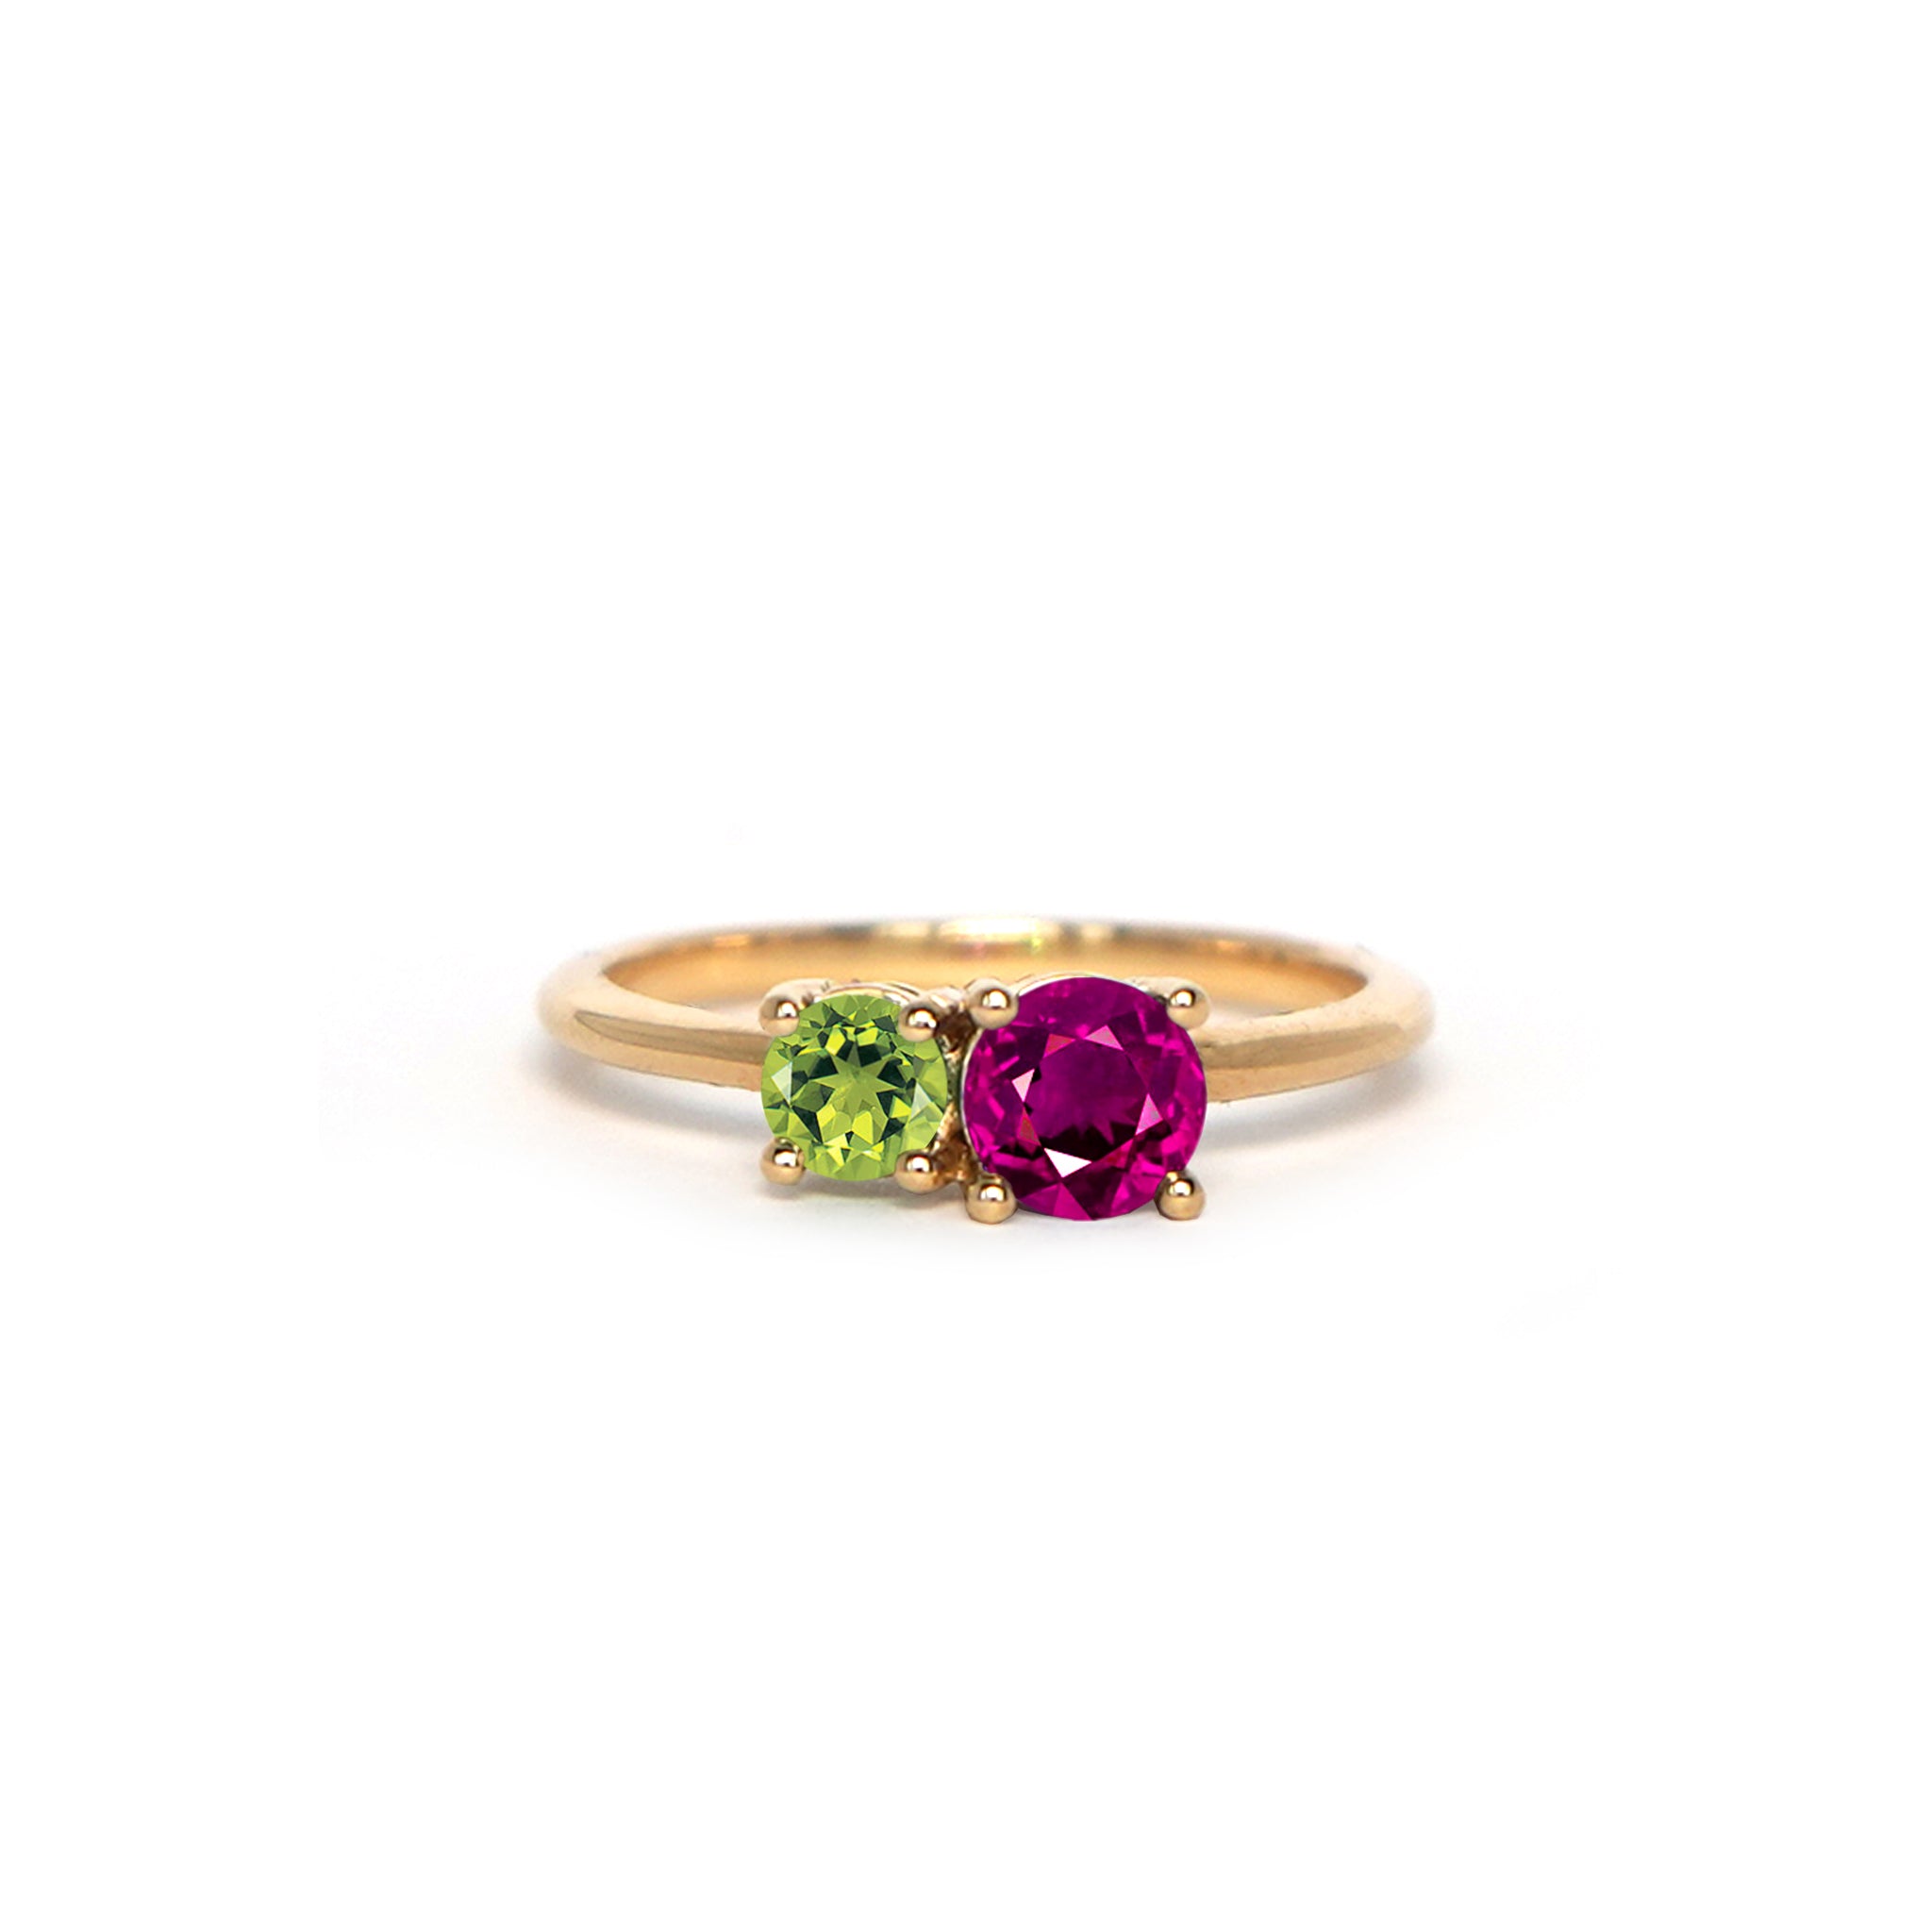 A product image of the Rhododendron ring on a white background Lico Jewelry